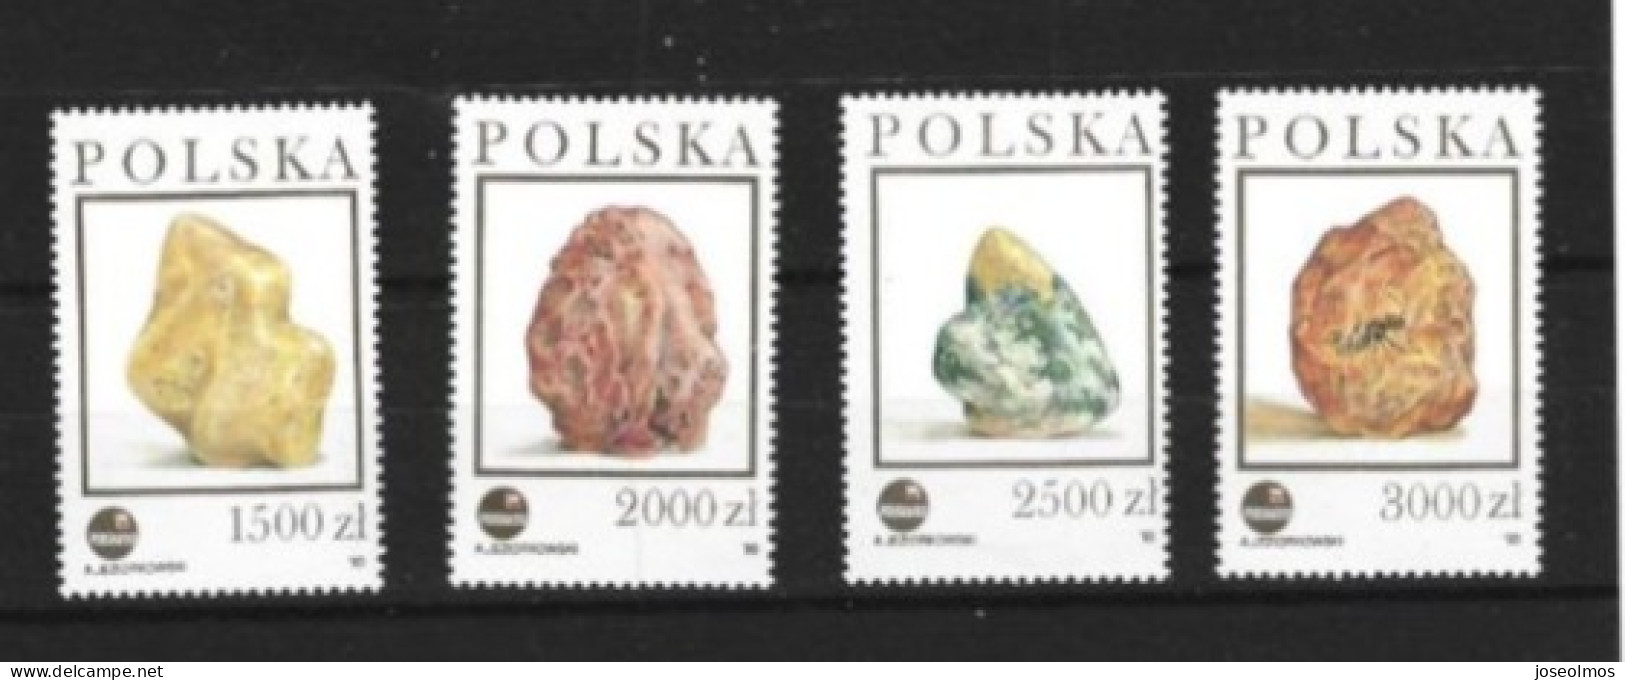 POLOGNE ANNEE 1993 N°3426-3429 MI NEUF** LUXE MNH - Nuovi